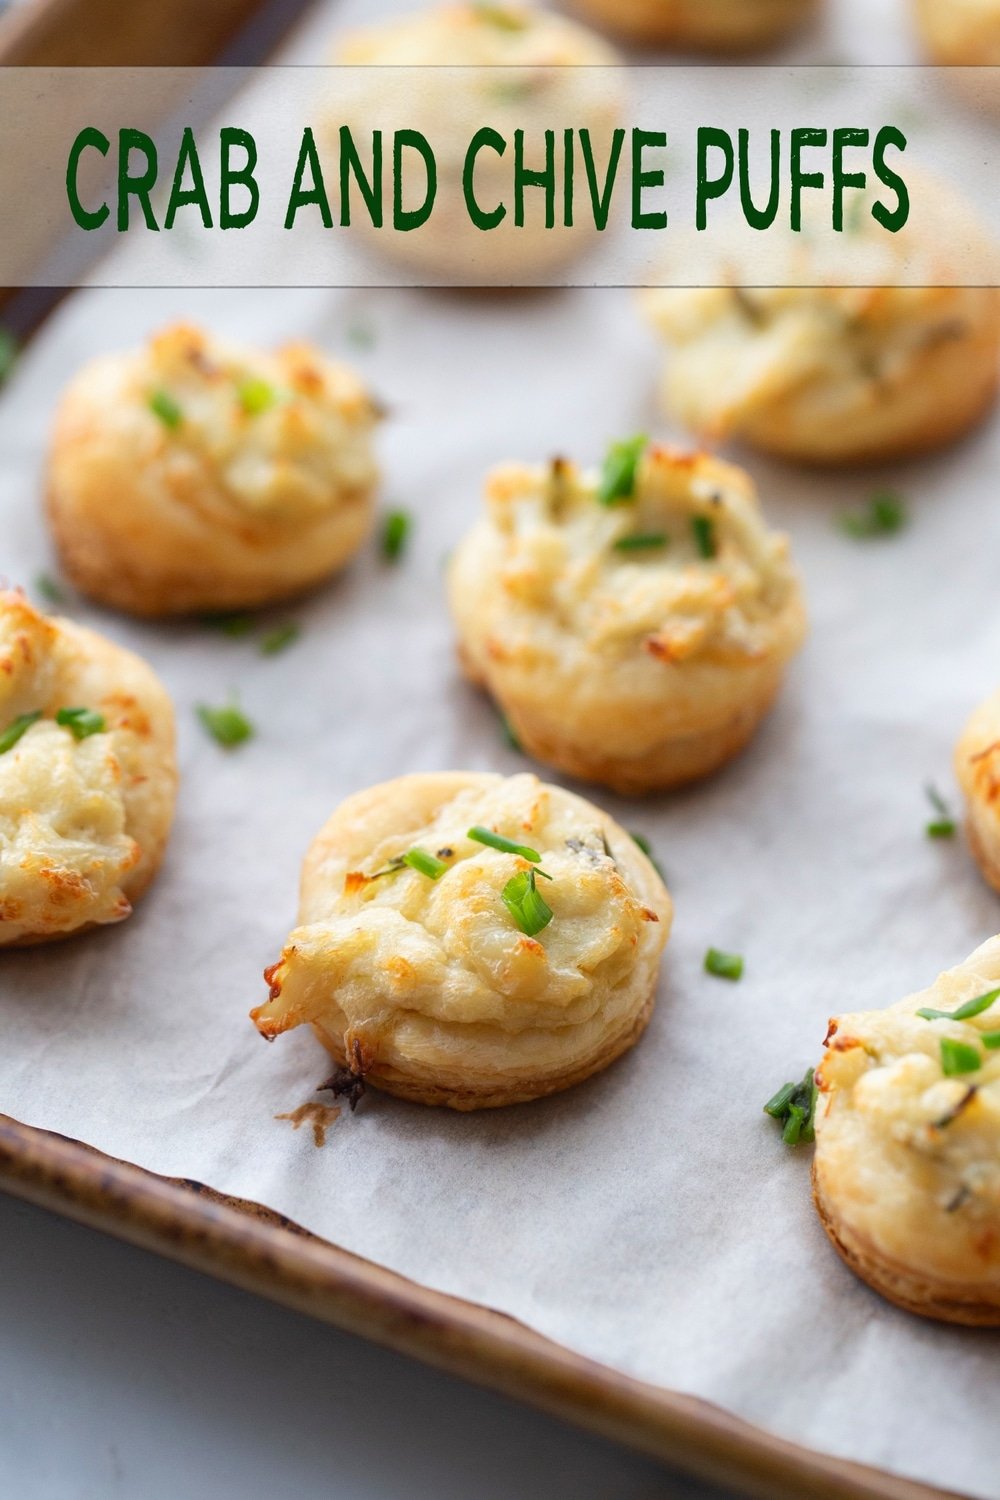 Impress your guests with these delicious and elegant Crab and Chive Puffs! Made with puff pastry, crab meat and a cream cheesy-chive mixture, these savory bites are the perfect party appetizer. Quick and easy to prepare, these puffs are sure to be a hit at any gathering. Perfect as finger-food or as a party starter, they're a must-try for any seafood lover! #CrabChivePuffs #PartyAppetizer #SeafoodAppetizer #EasyRecipes #FingerFood via @cmpollak1